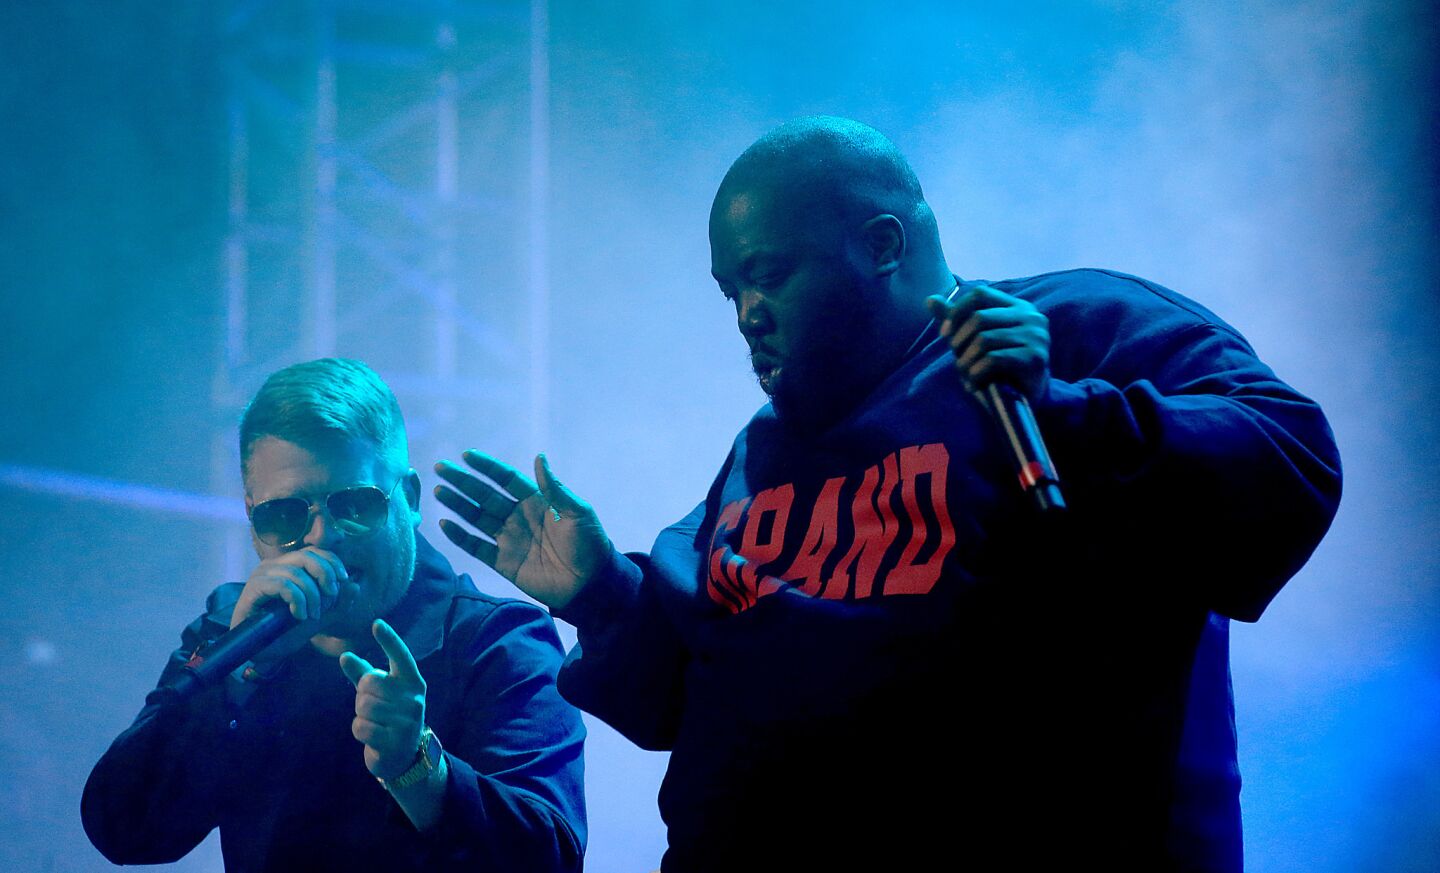 El-P, left, and Killer Mike of Run The Jewels perform at the Coachella Valley Music and Arts Festival on April 11.